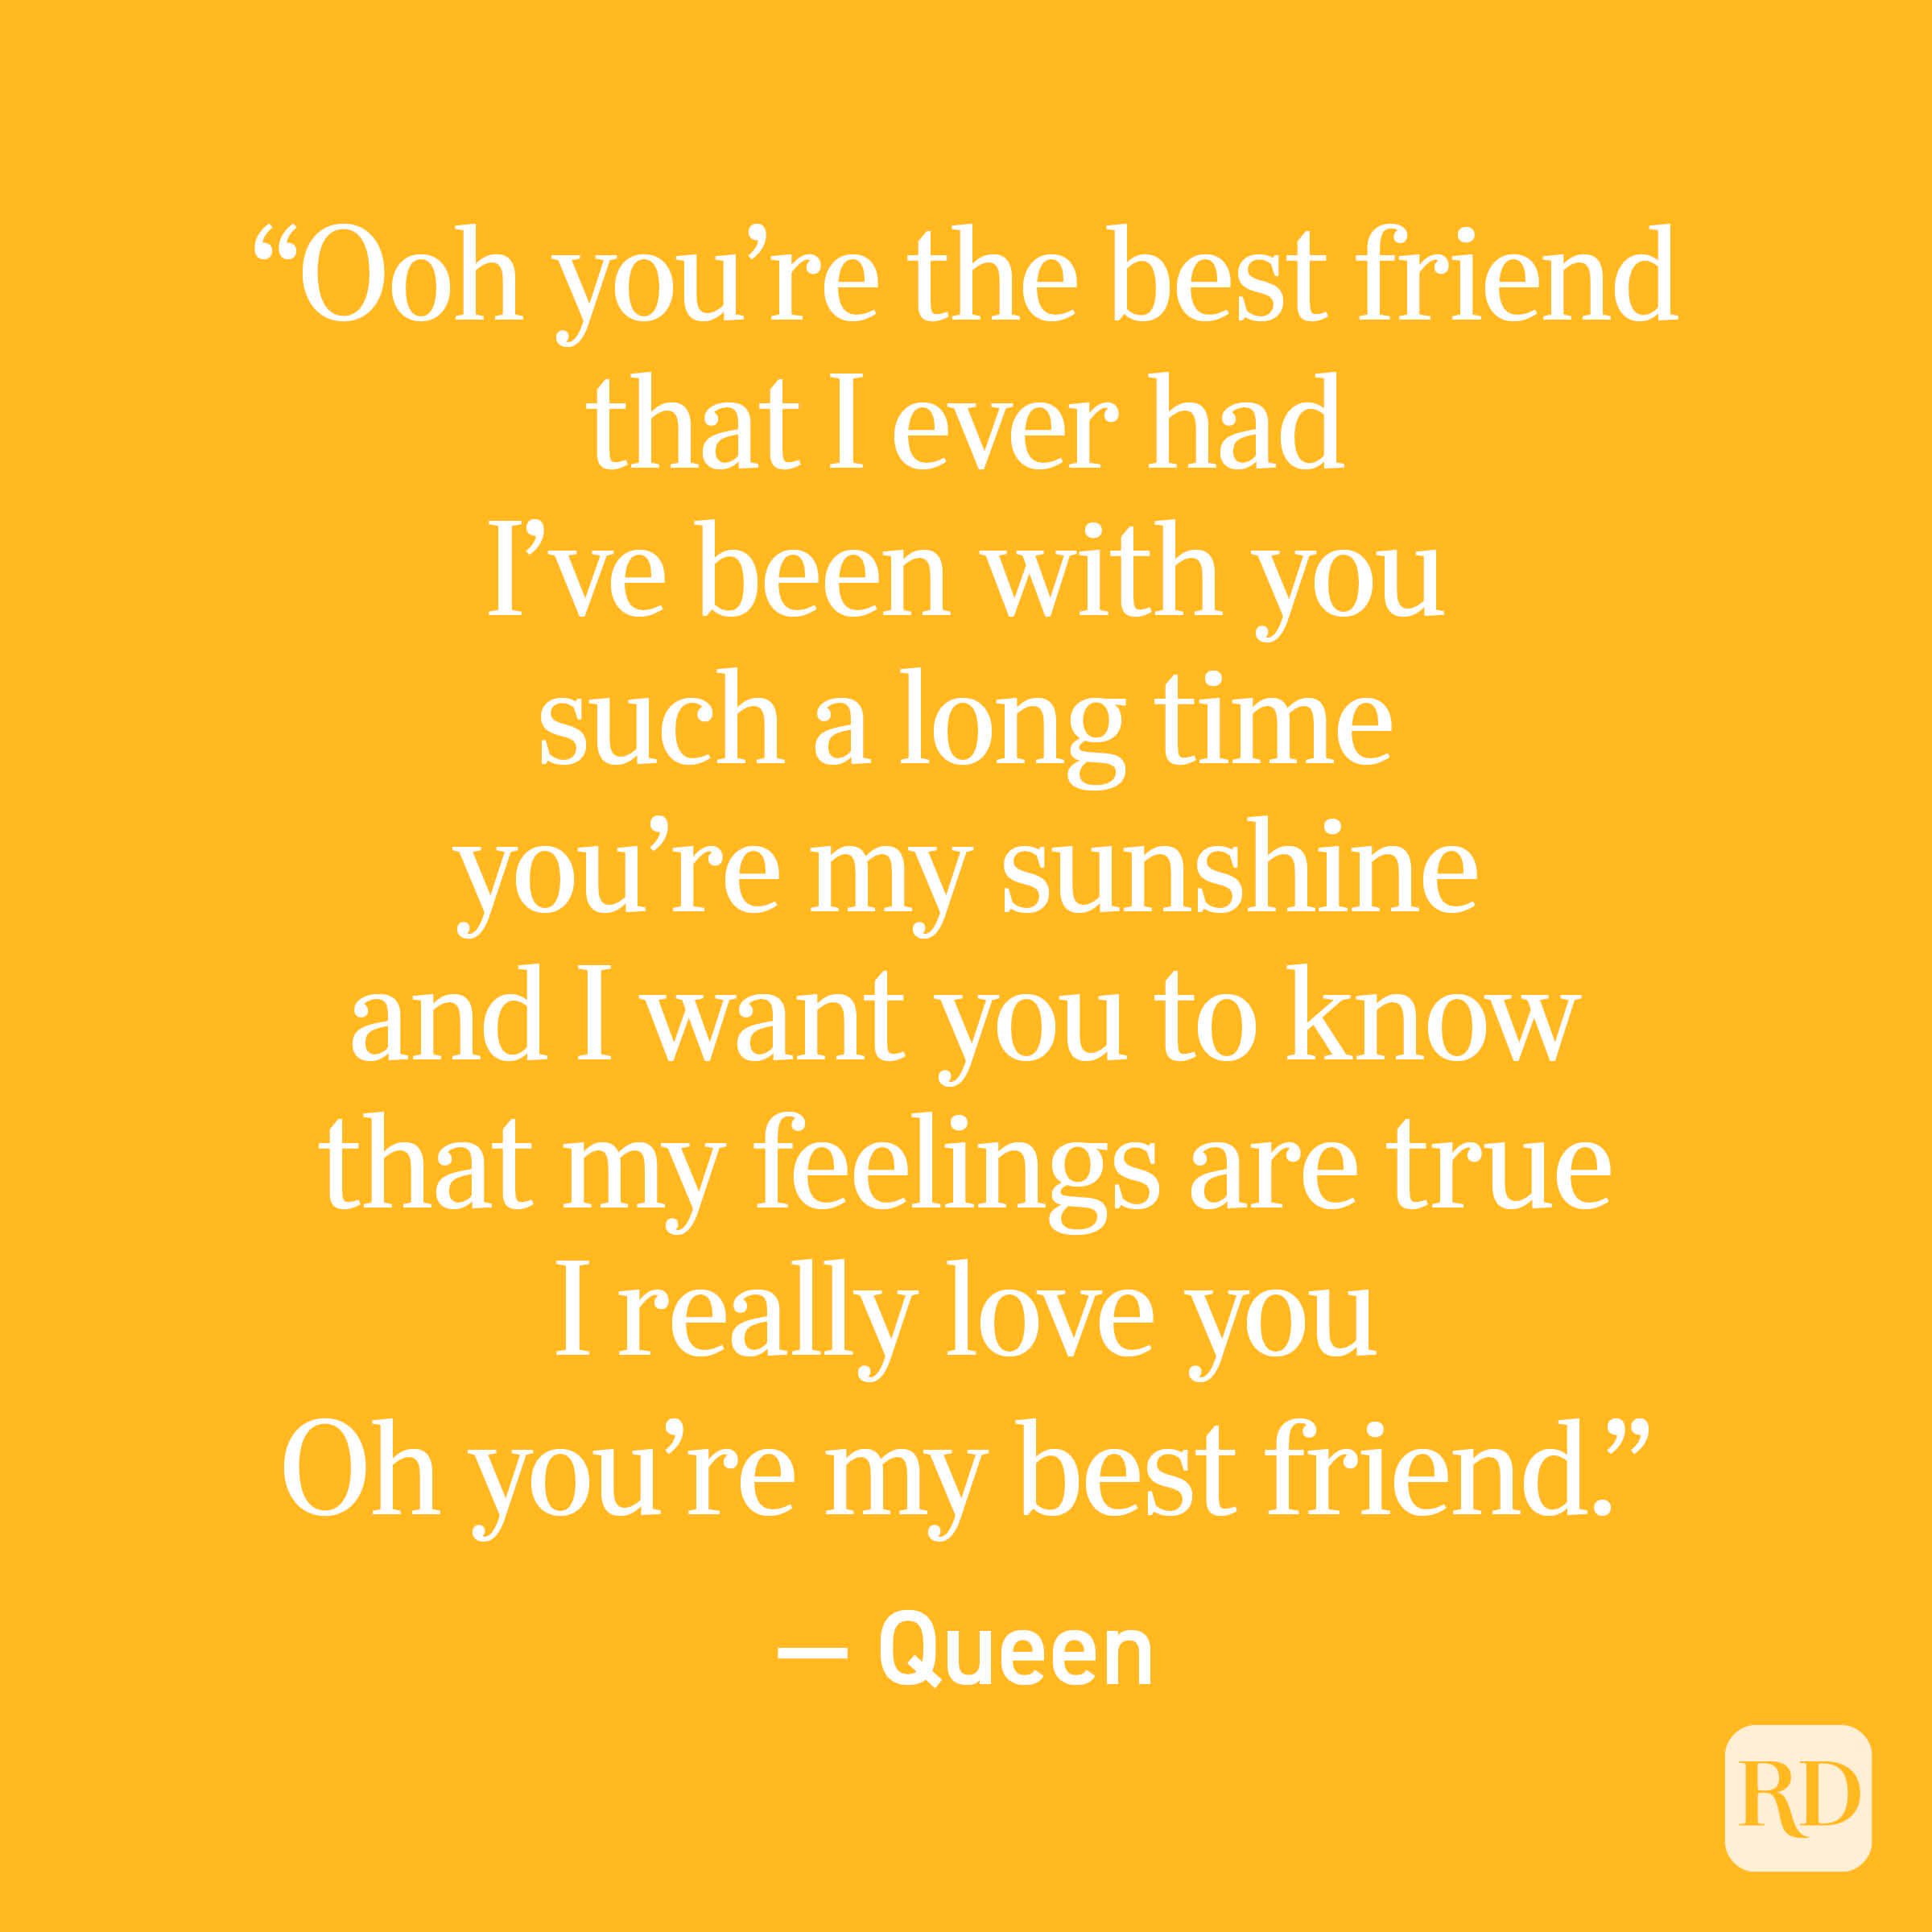 “Ooh you’re the best friend that I ever had I’ve been with you such a long time you’re my sunshine and I want you to know that my feelings are true I really love you Oh you’re my best friend.” — Queen